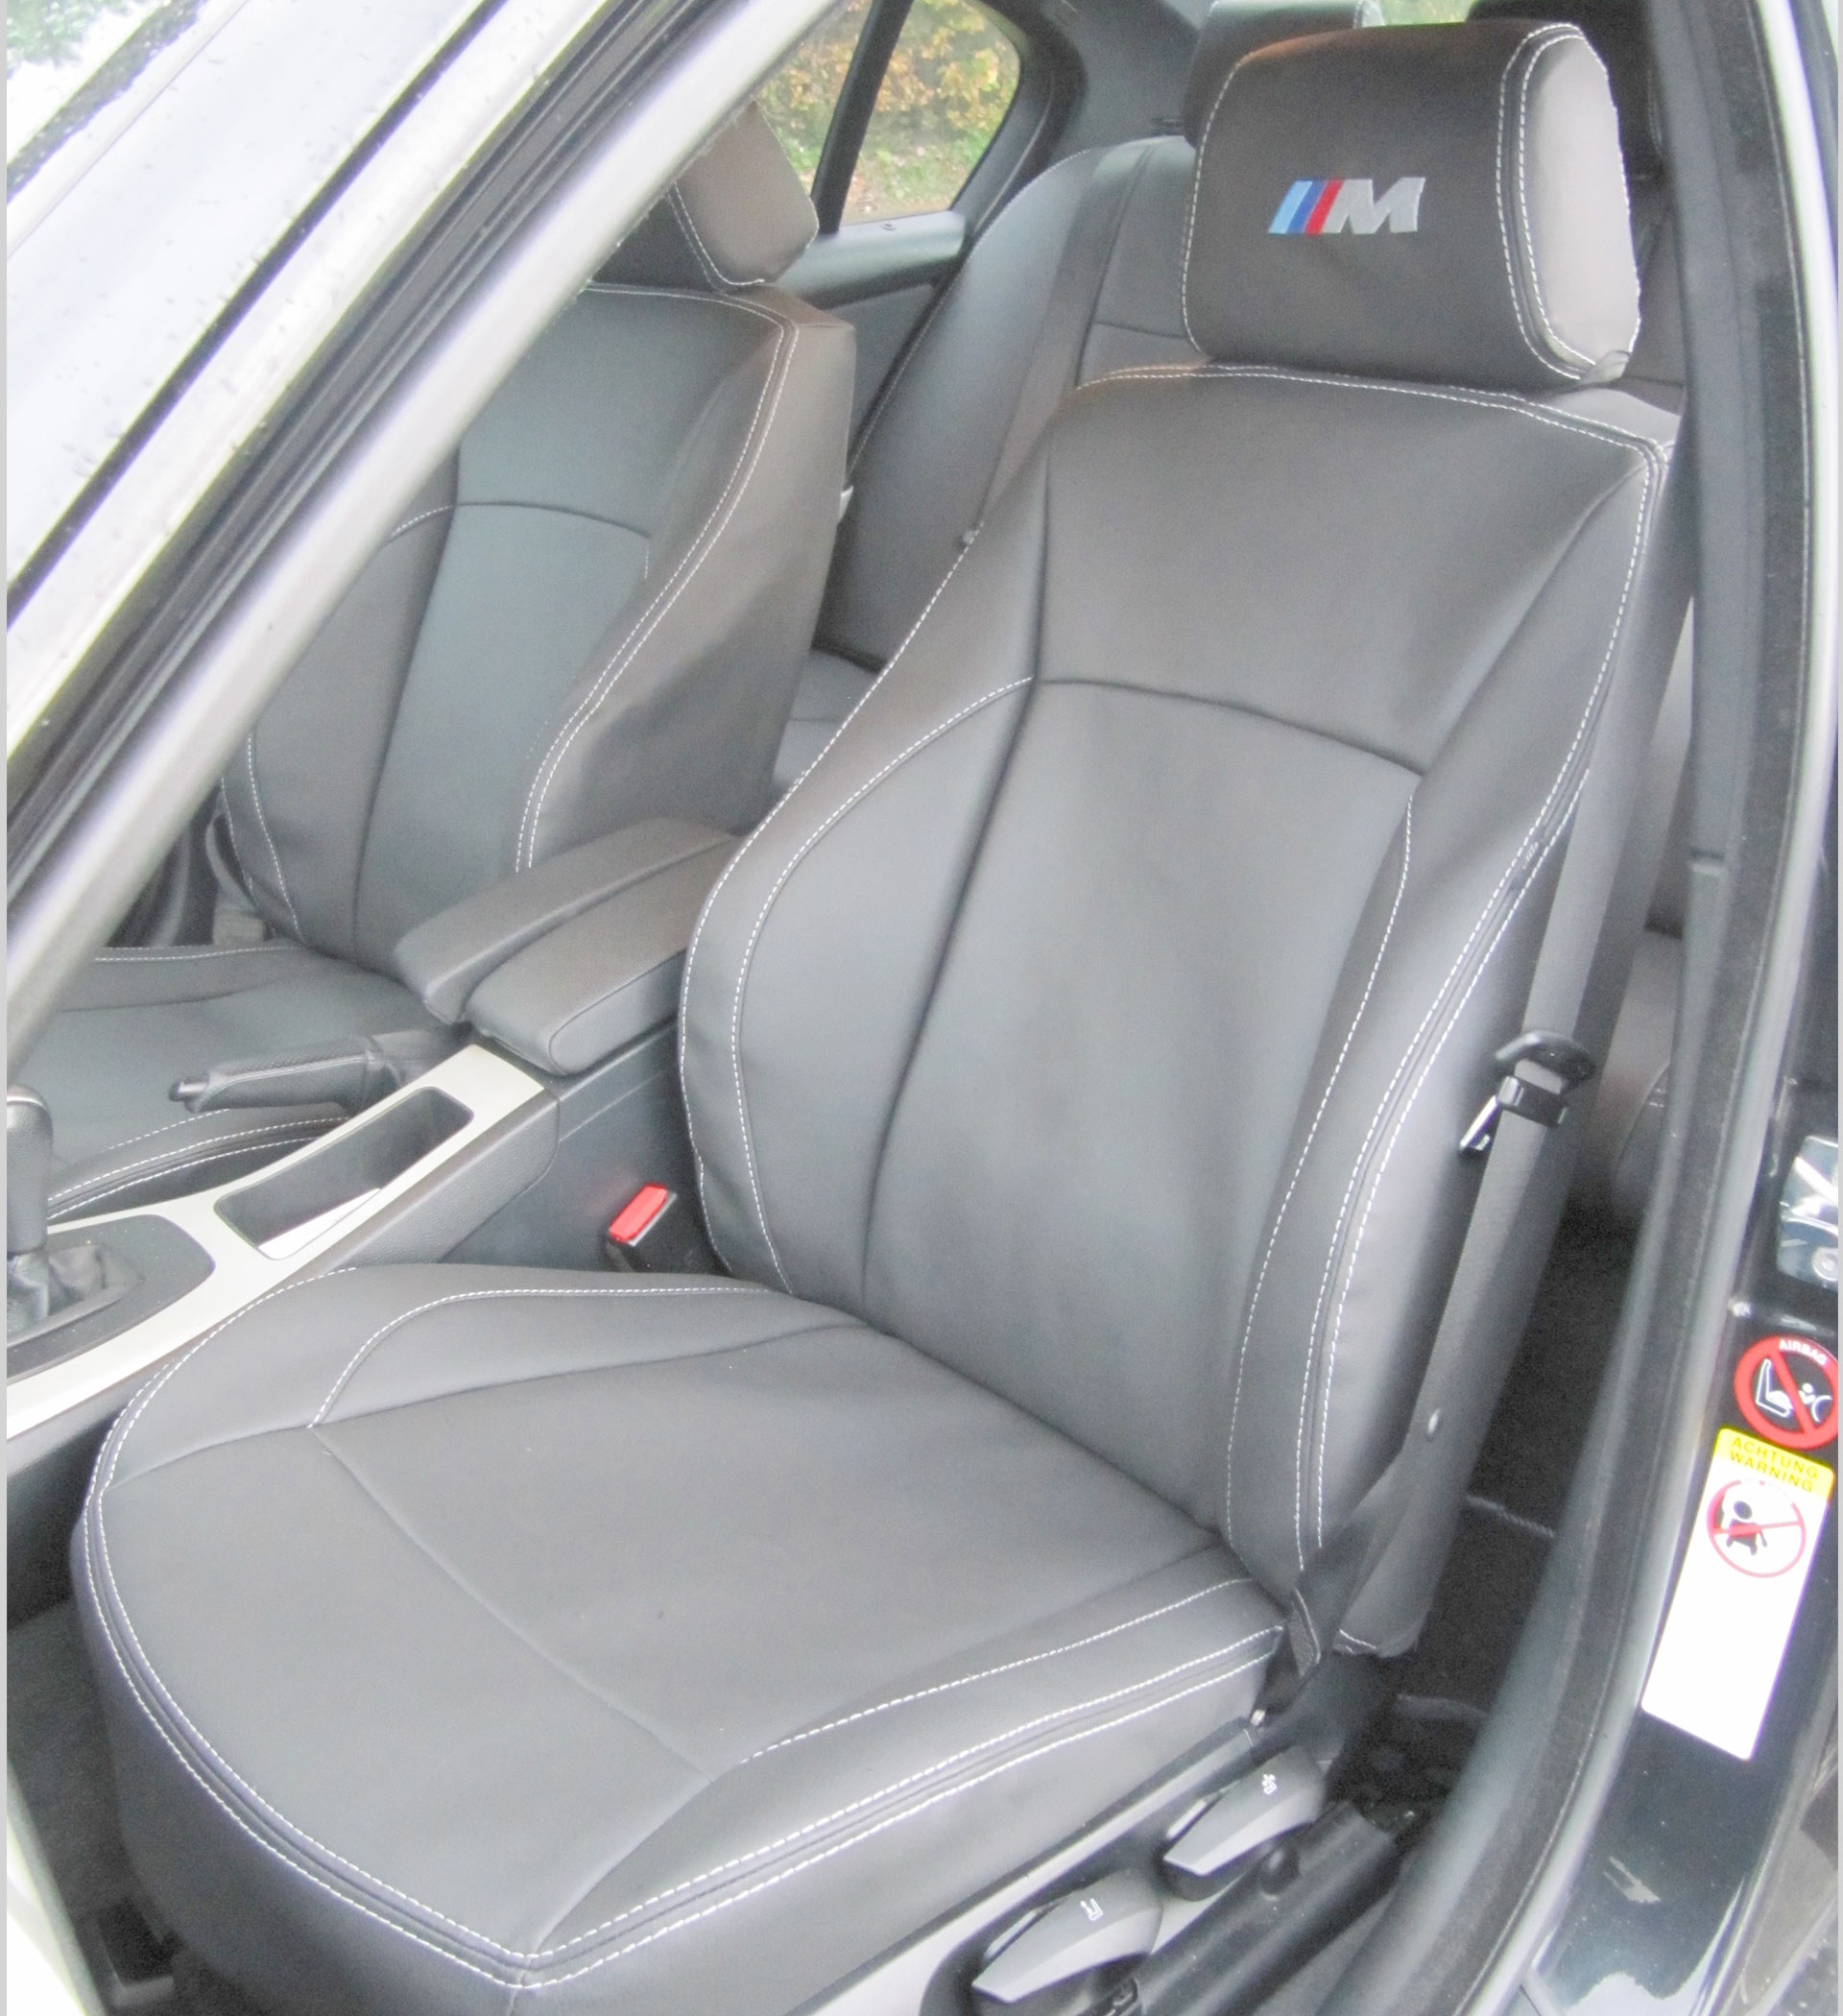 Nissan NV300 Leather Look Crew Cab Two Tone Seat Covers